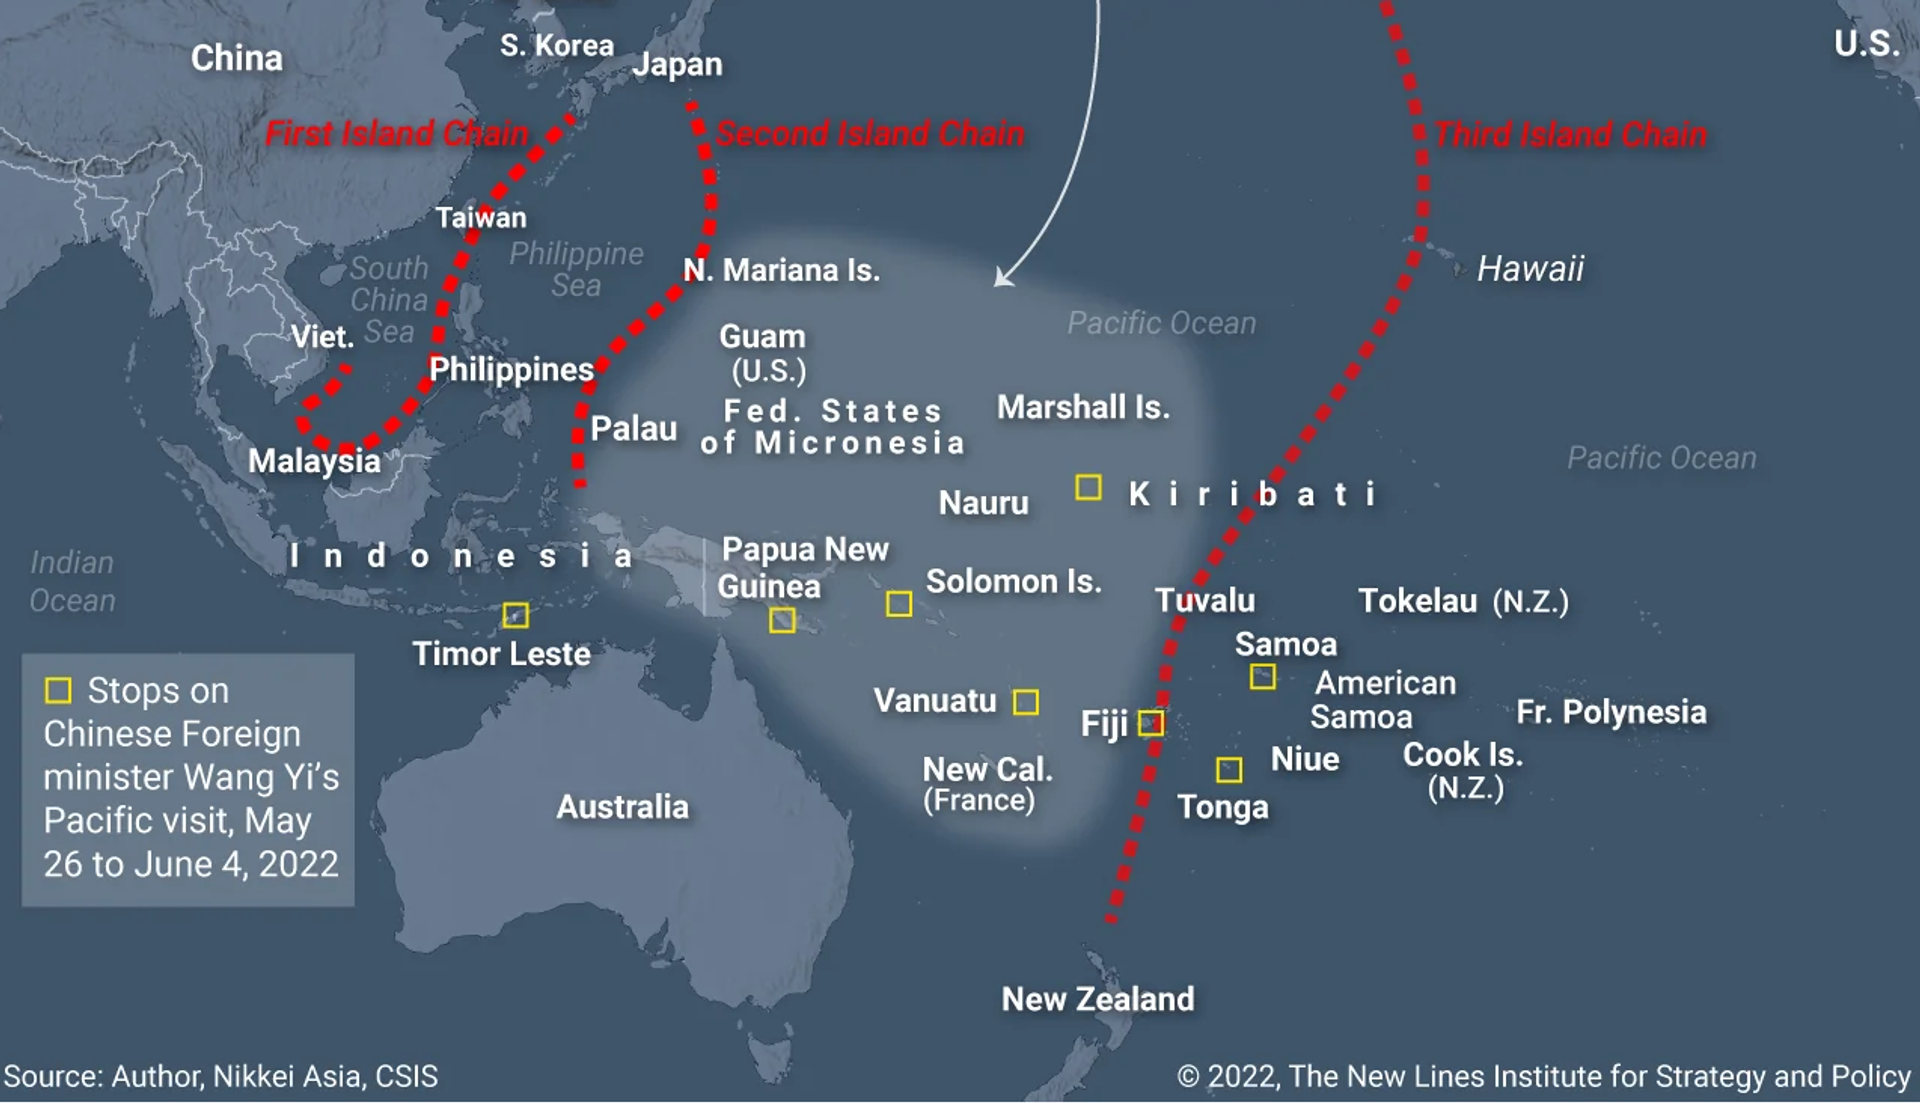 Excerpt from New Lines Institute for Strategy and Policy map showing the East Asian and Pacific Island nations at the faultlines of the US's so-called 'Island Chain Strategy', designed to hem China in militarily and commercially in its home shores. - Sputnik International, 1920, 05.04.2024